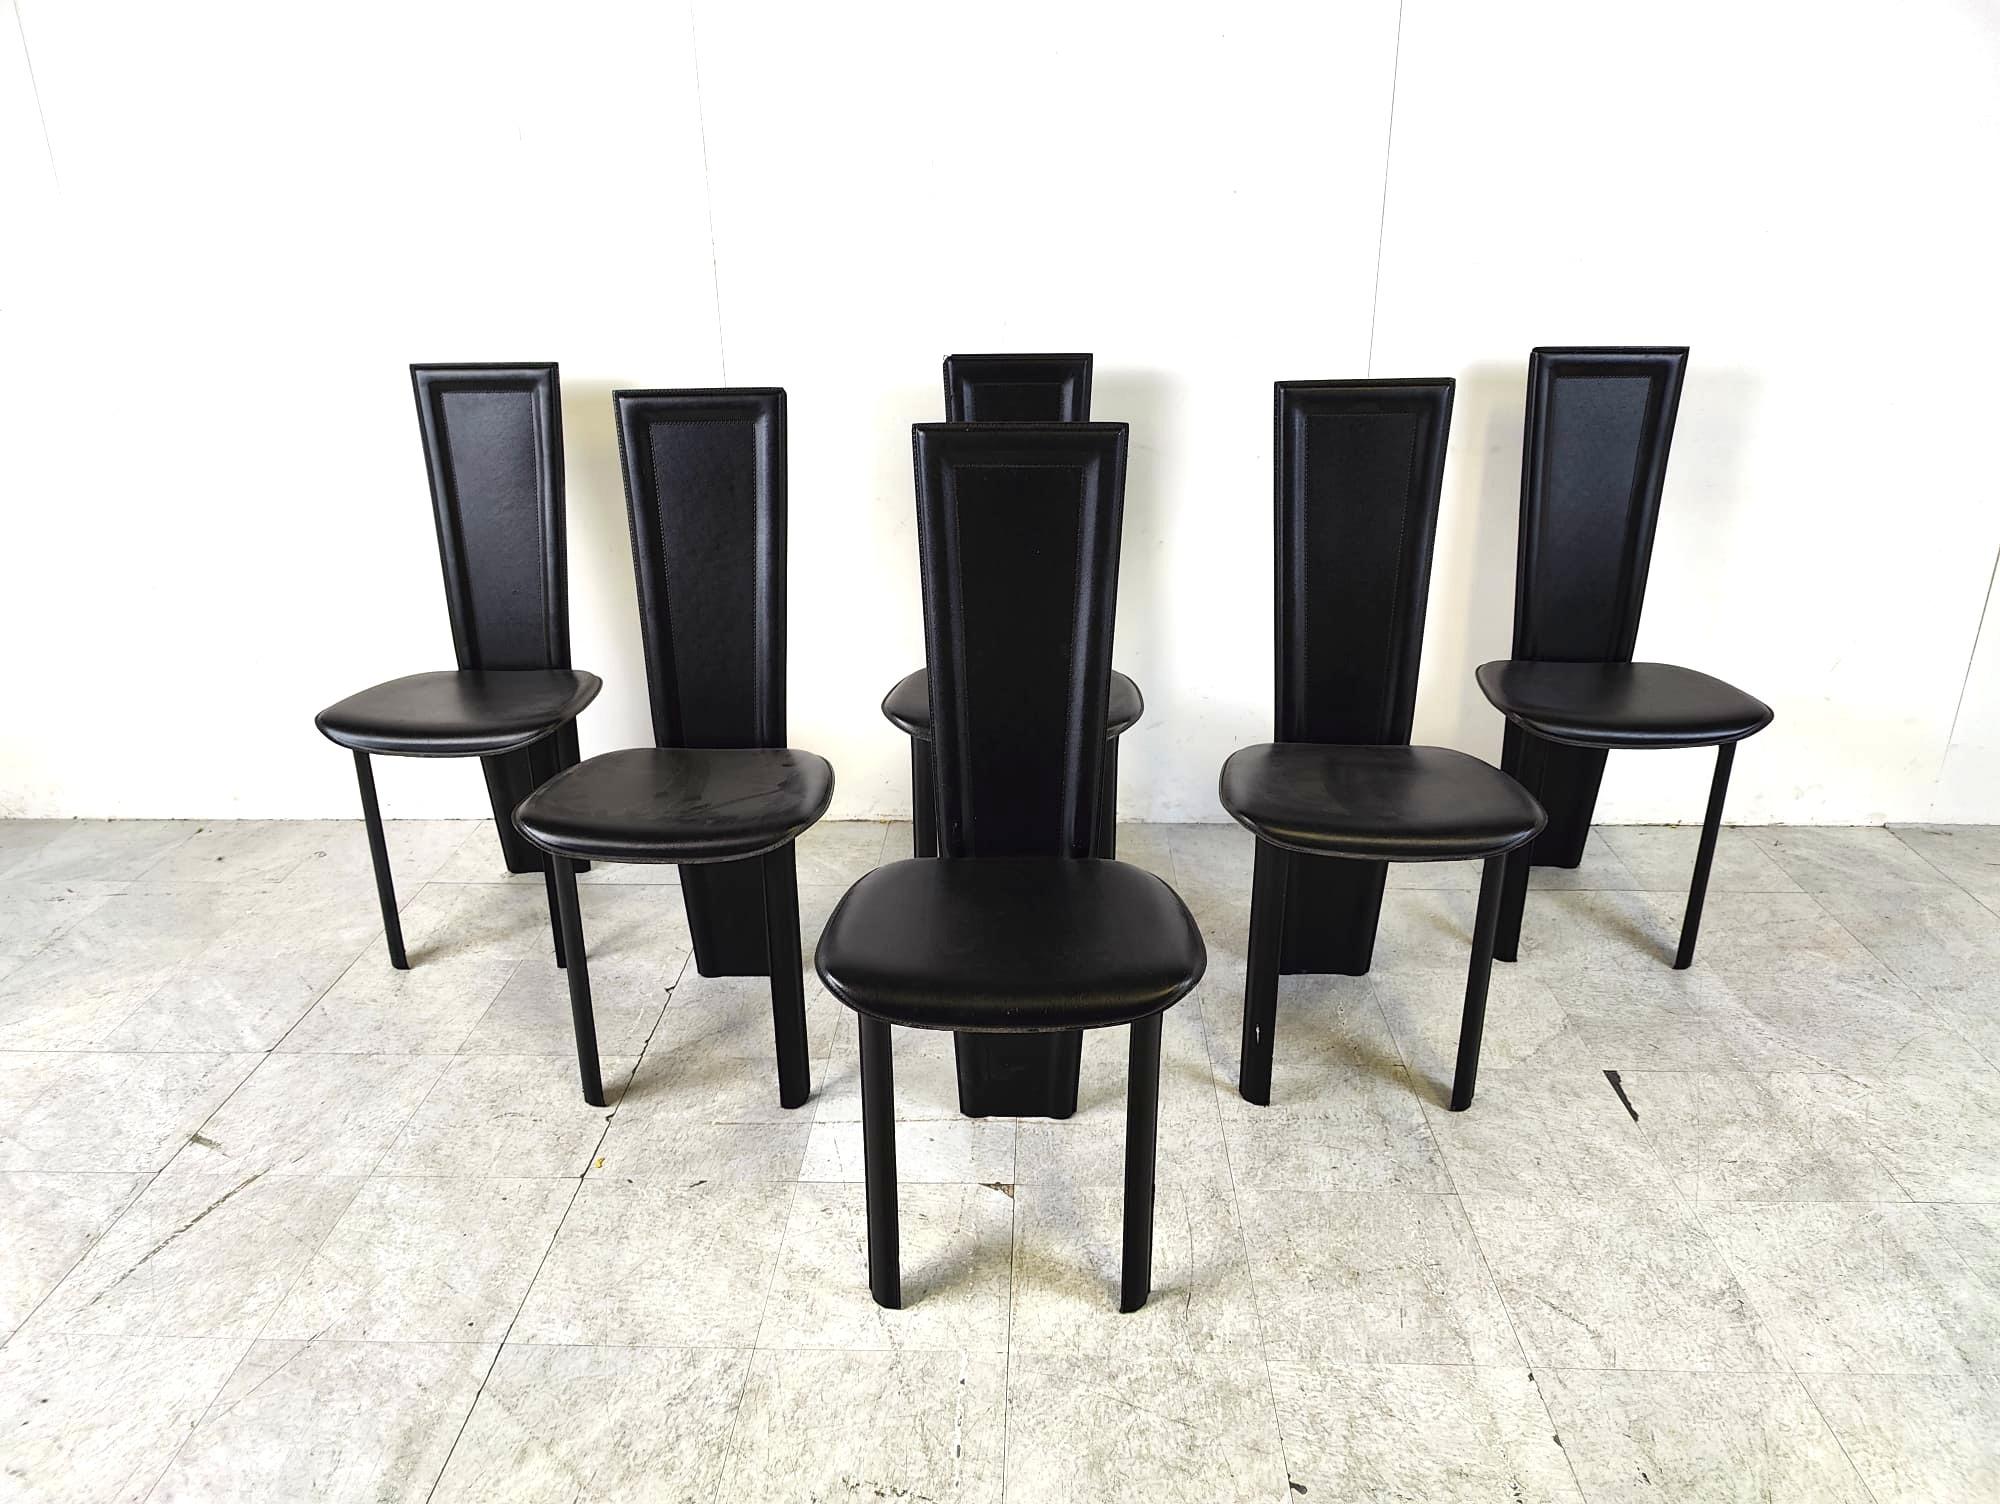 Set of 6 black italian leather high back dining chairs.

beautiful sleek and timeless design.

The chairs are in good condition

1980s - Italy

Dimensions
height: 102cm/40.15